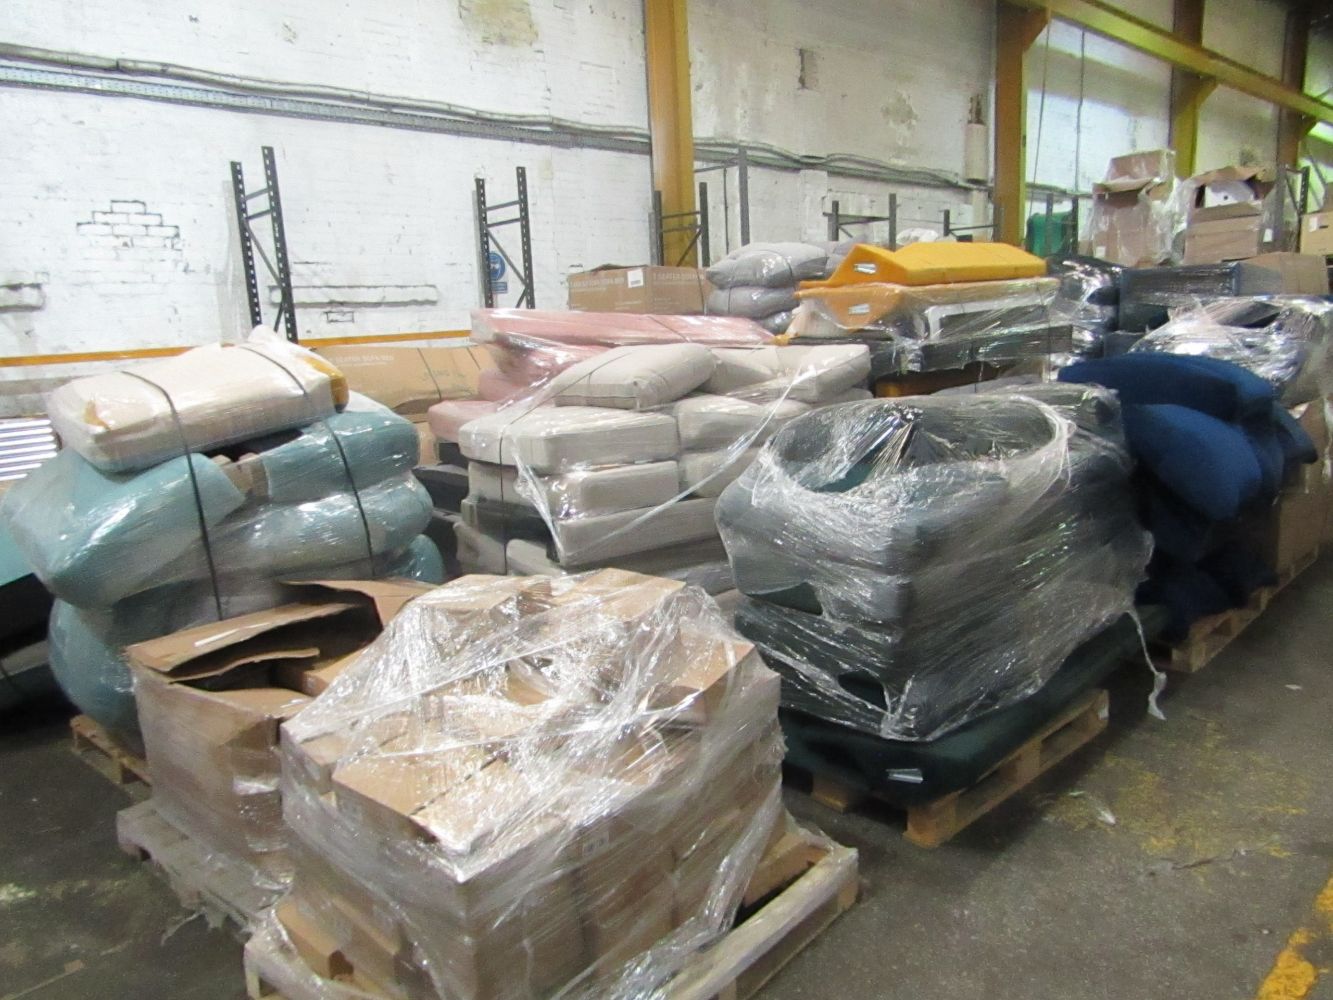 Bulk Lot of Snug sofa parts, 0% buyer commission!!! one time only